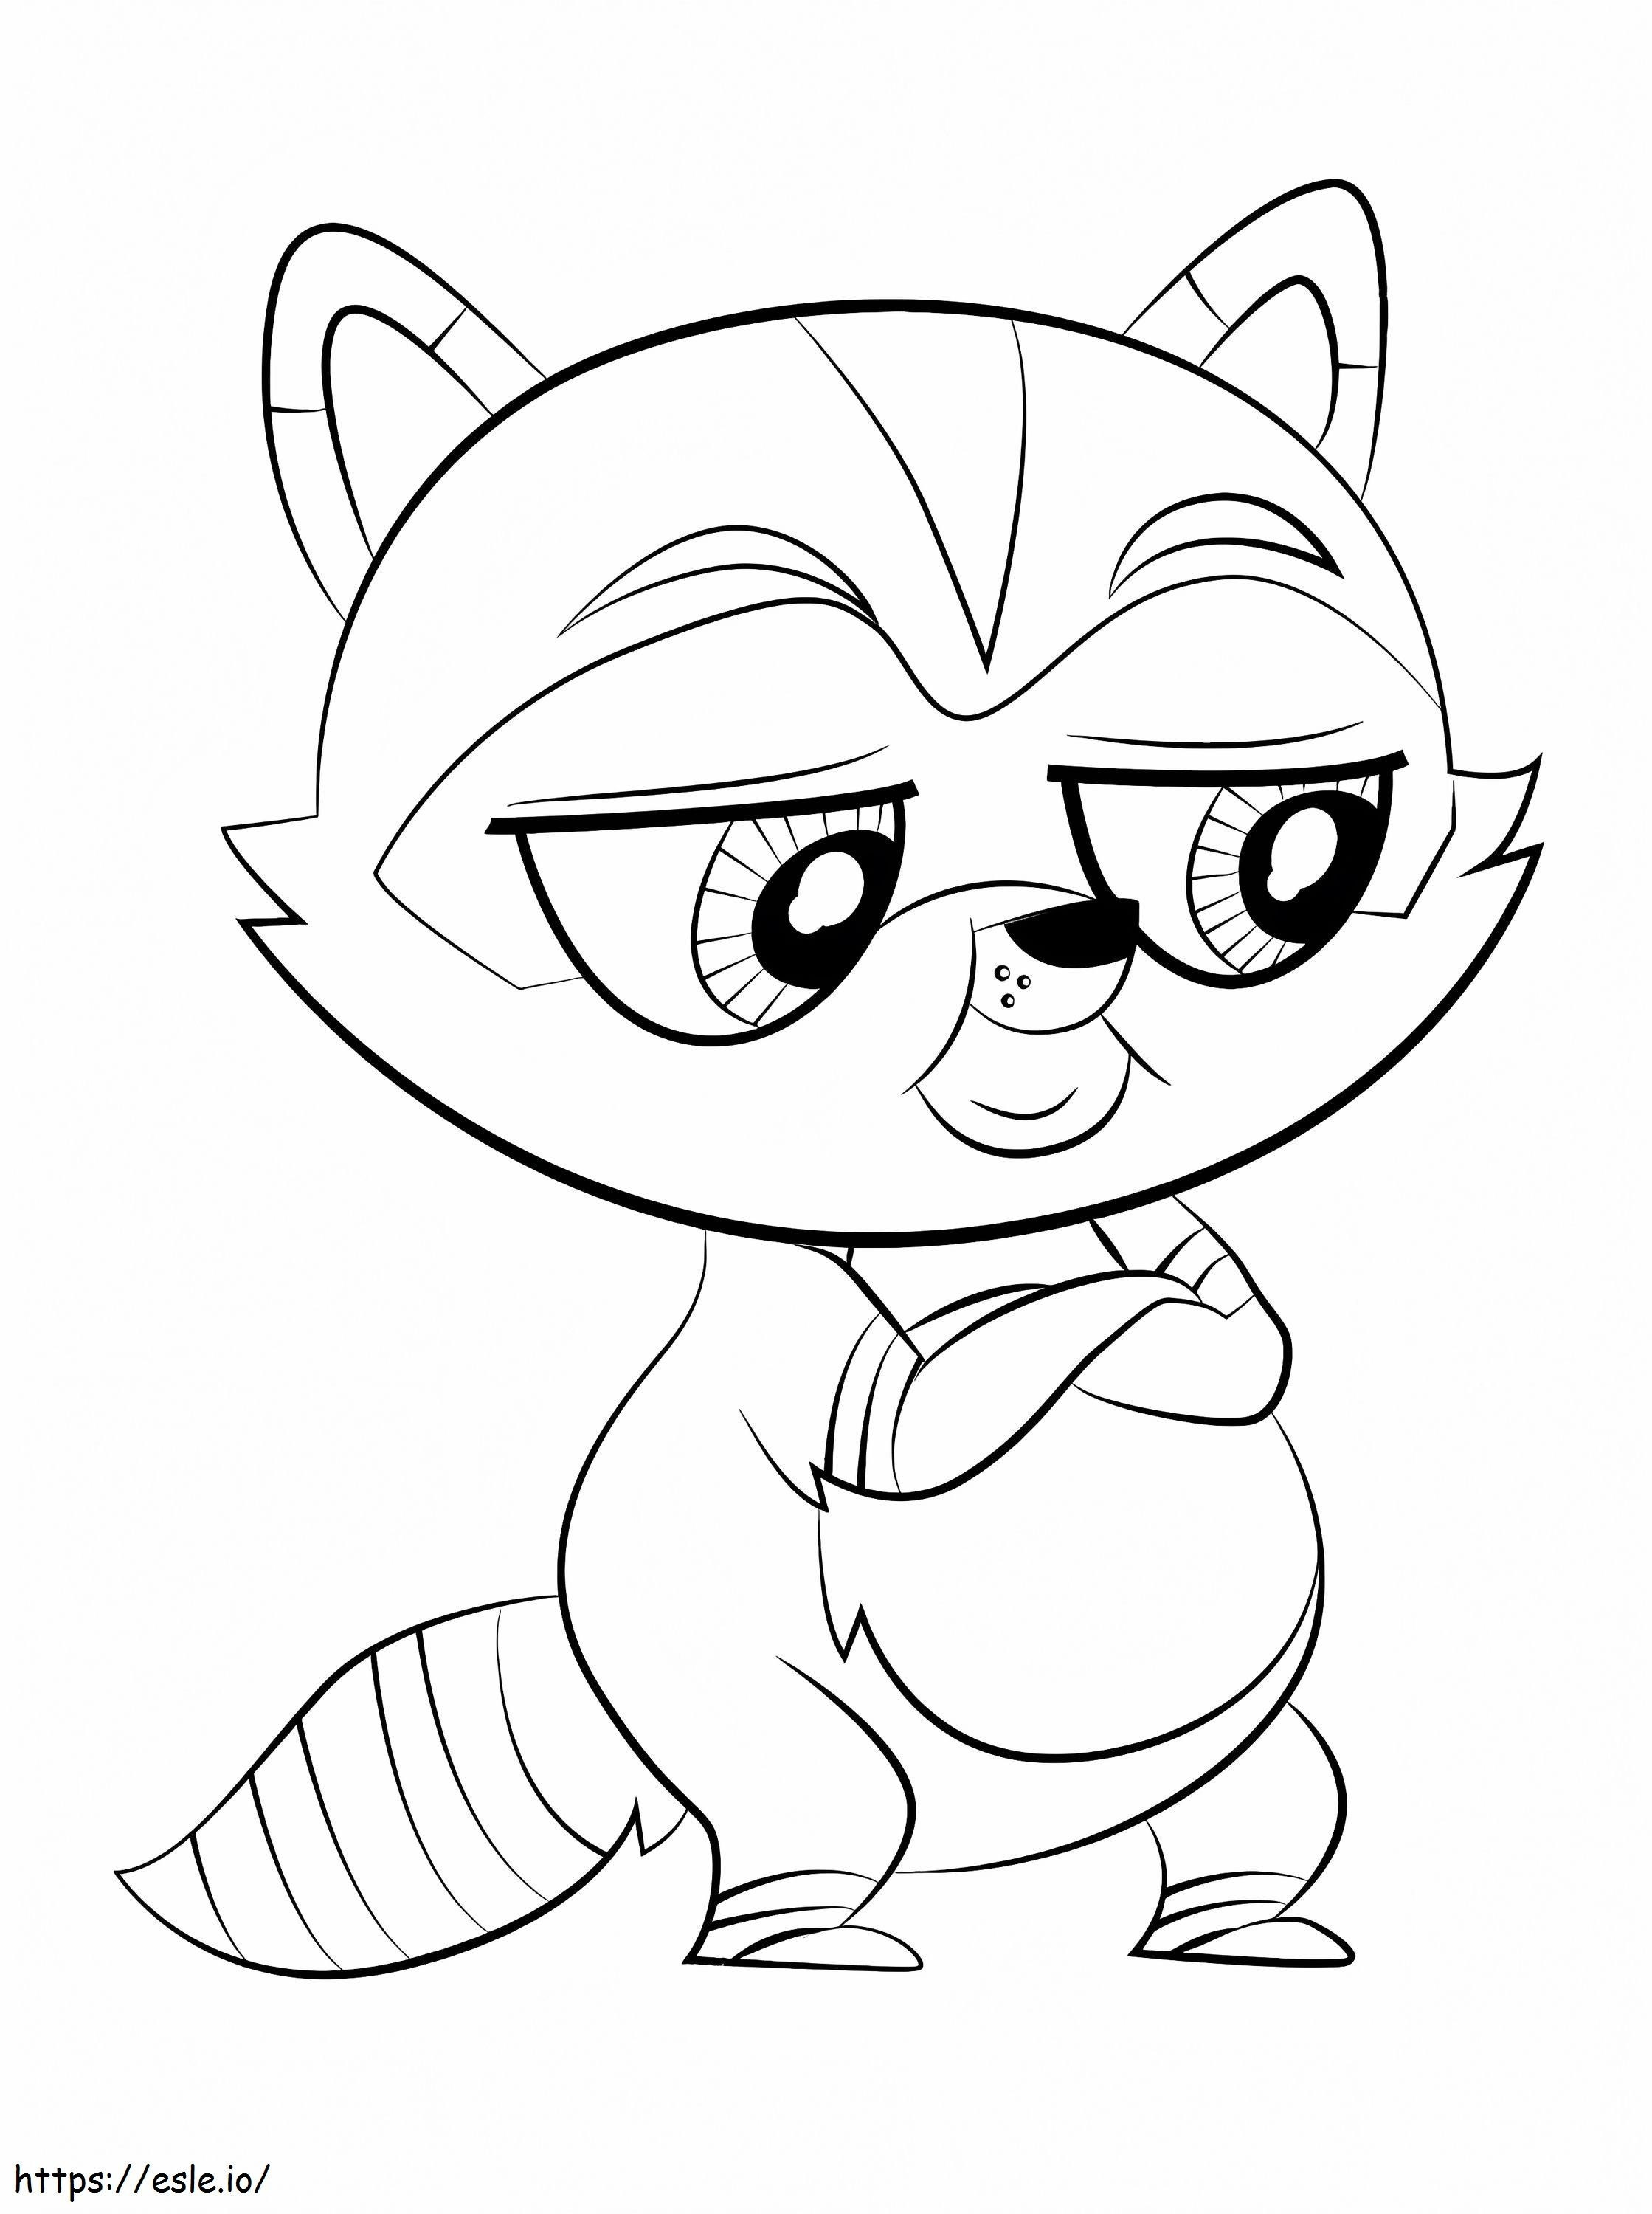 1589789794 How To Draw Mr Otto Von Fuzzlebutt From Littlest Pet Shop Step 0 coloring page